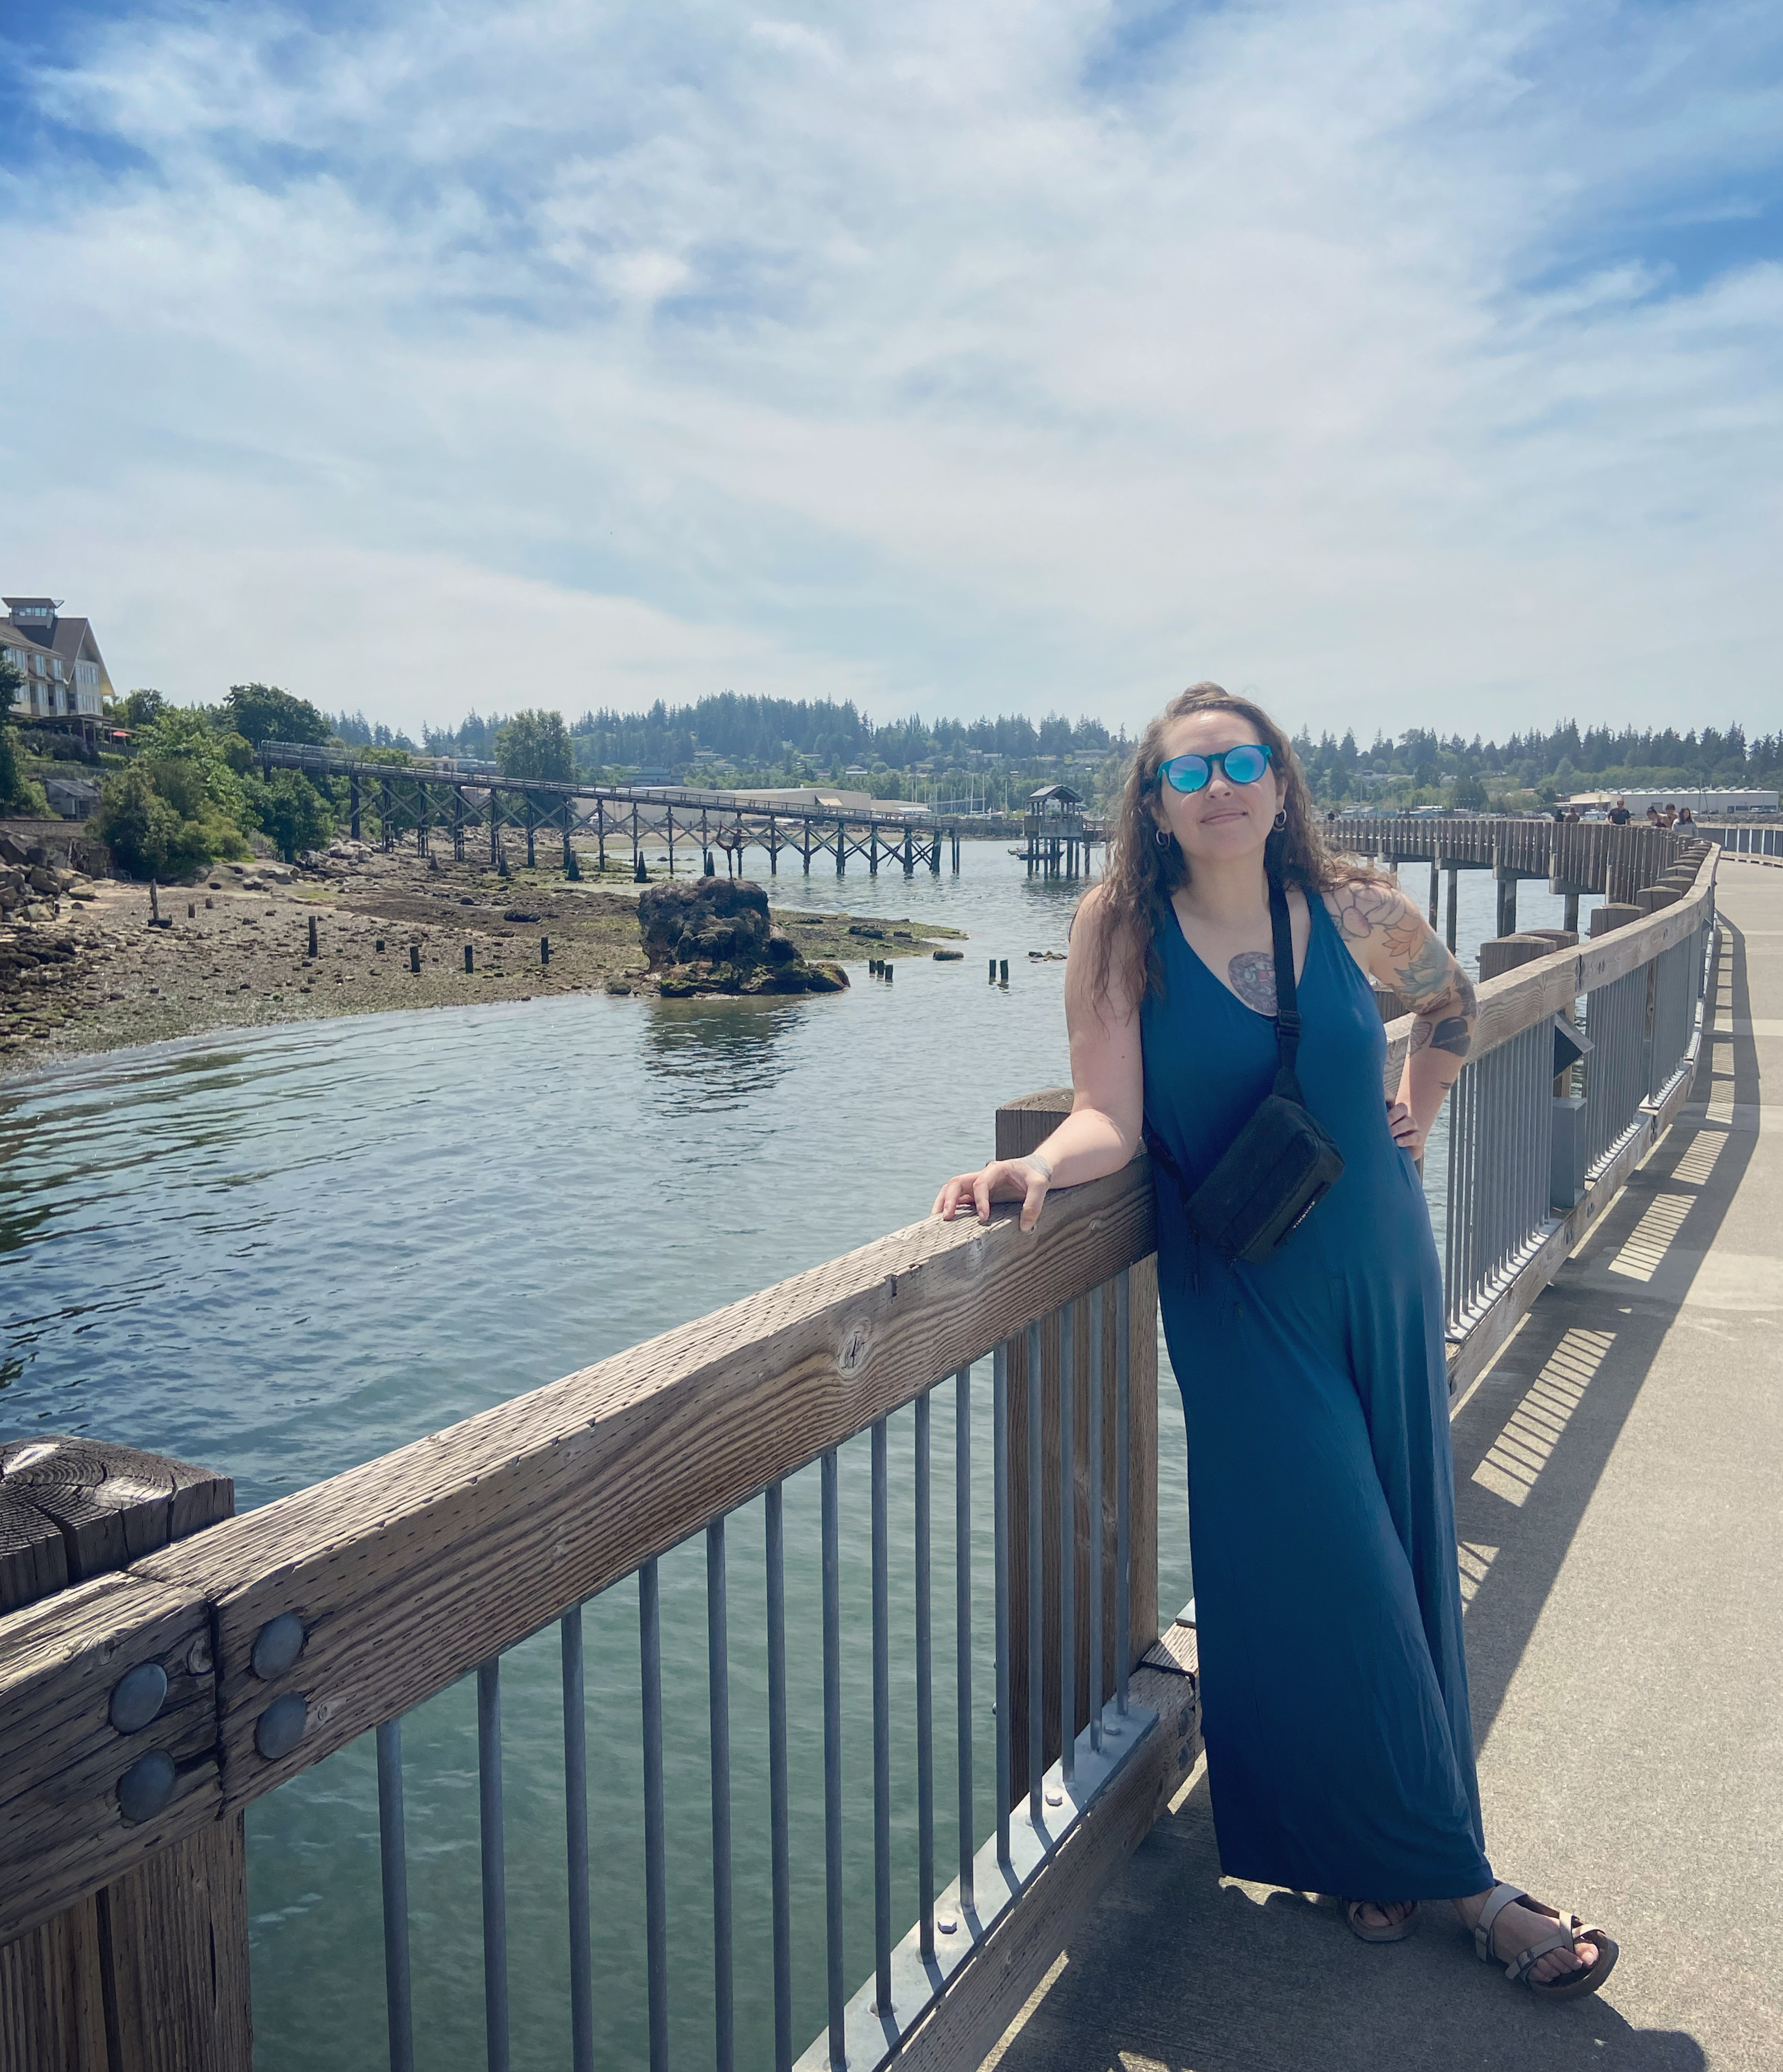 Theresa is leaning against the railing of a walkway over the water. She is wearing a blue jumper and sunglasses. The sky is light blue with wispy clouds.